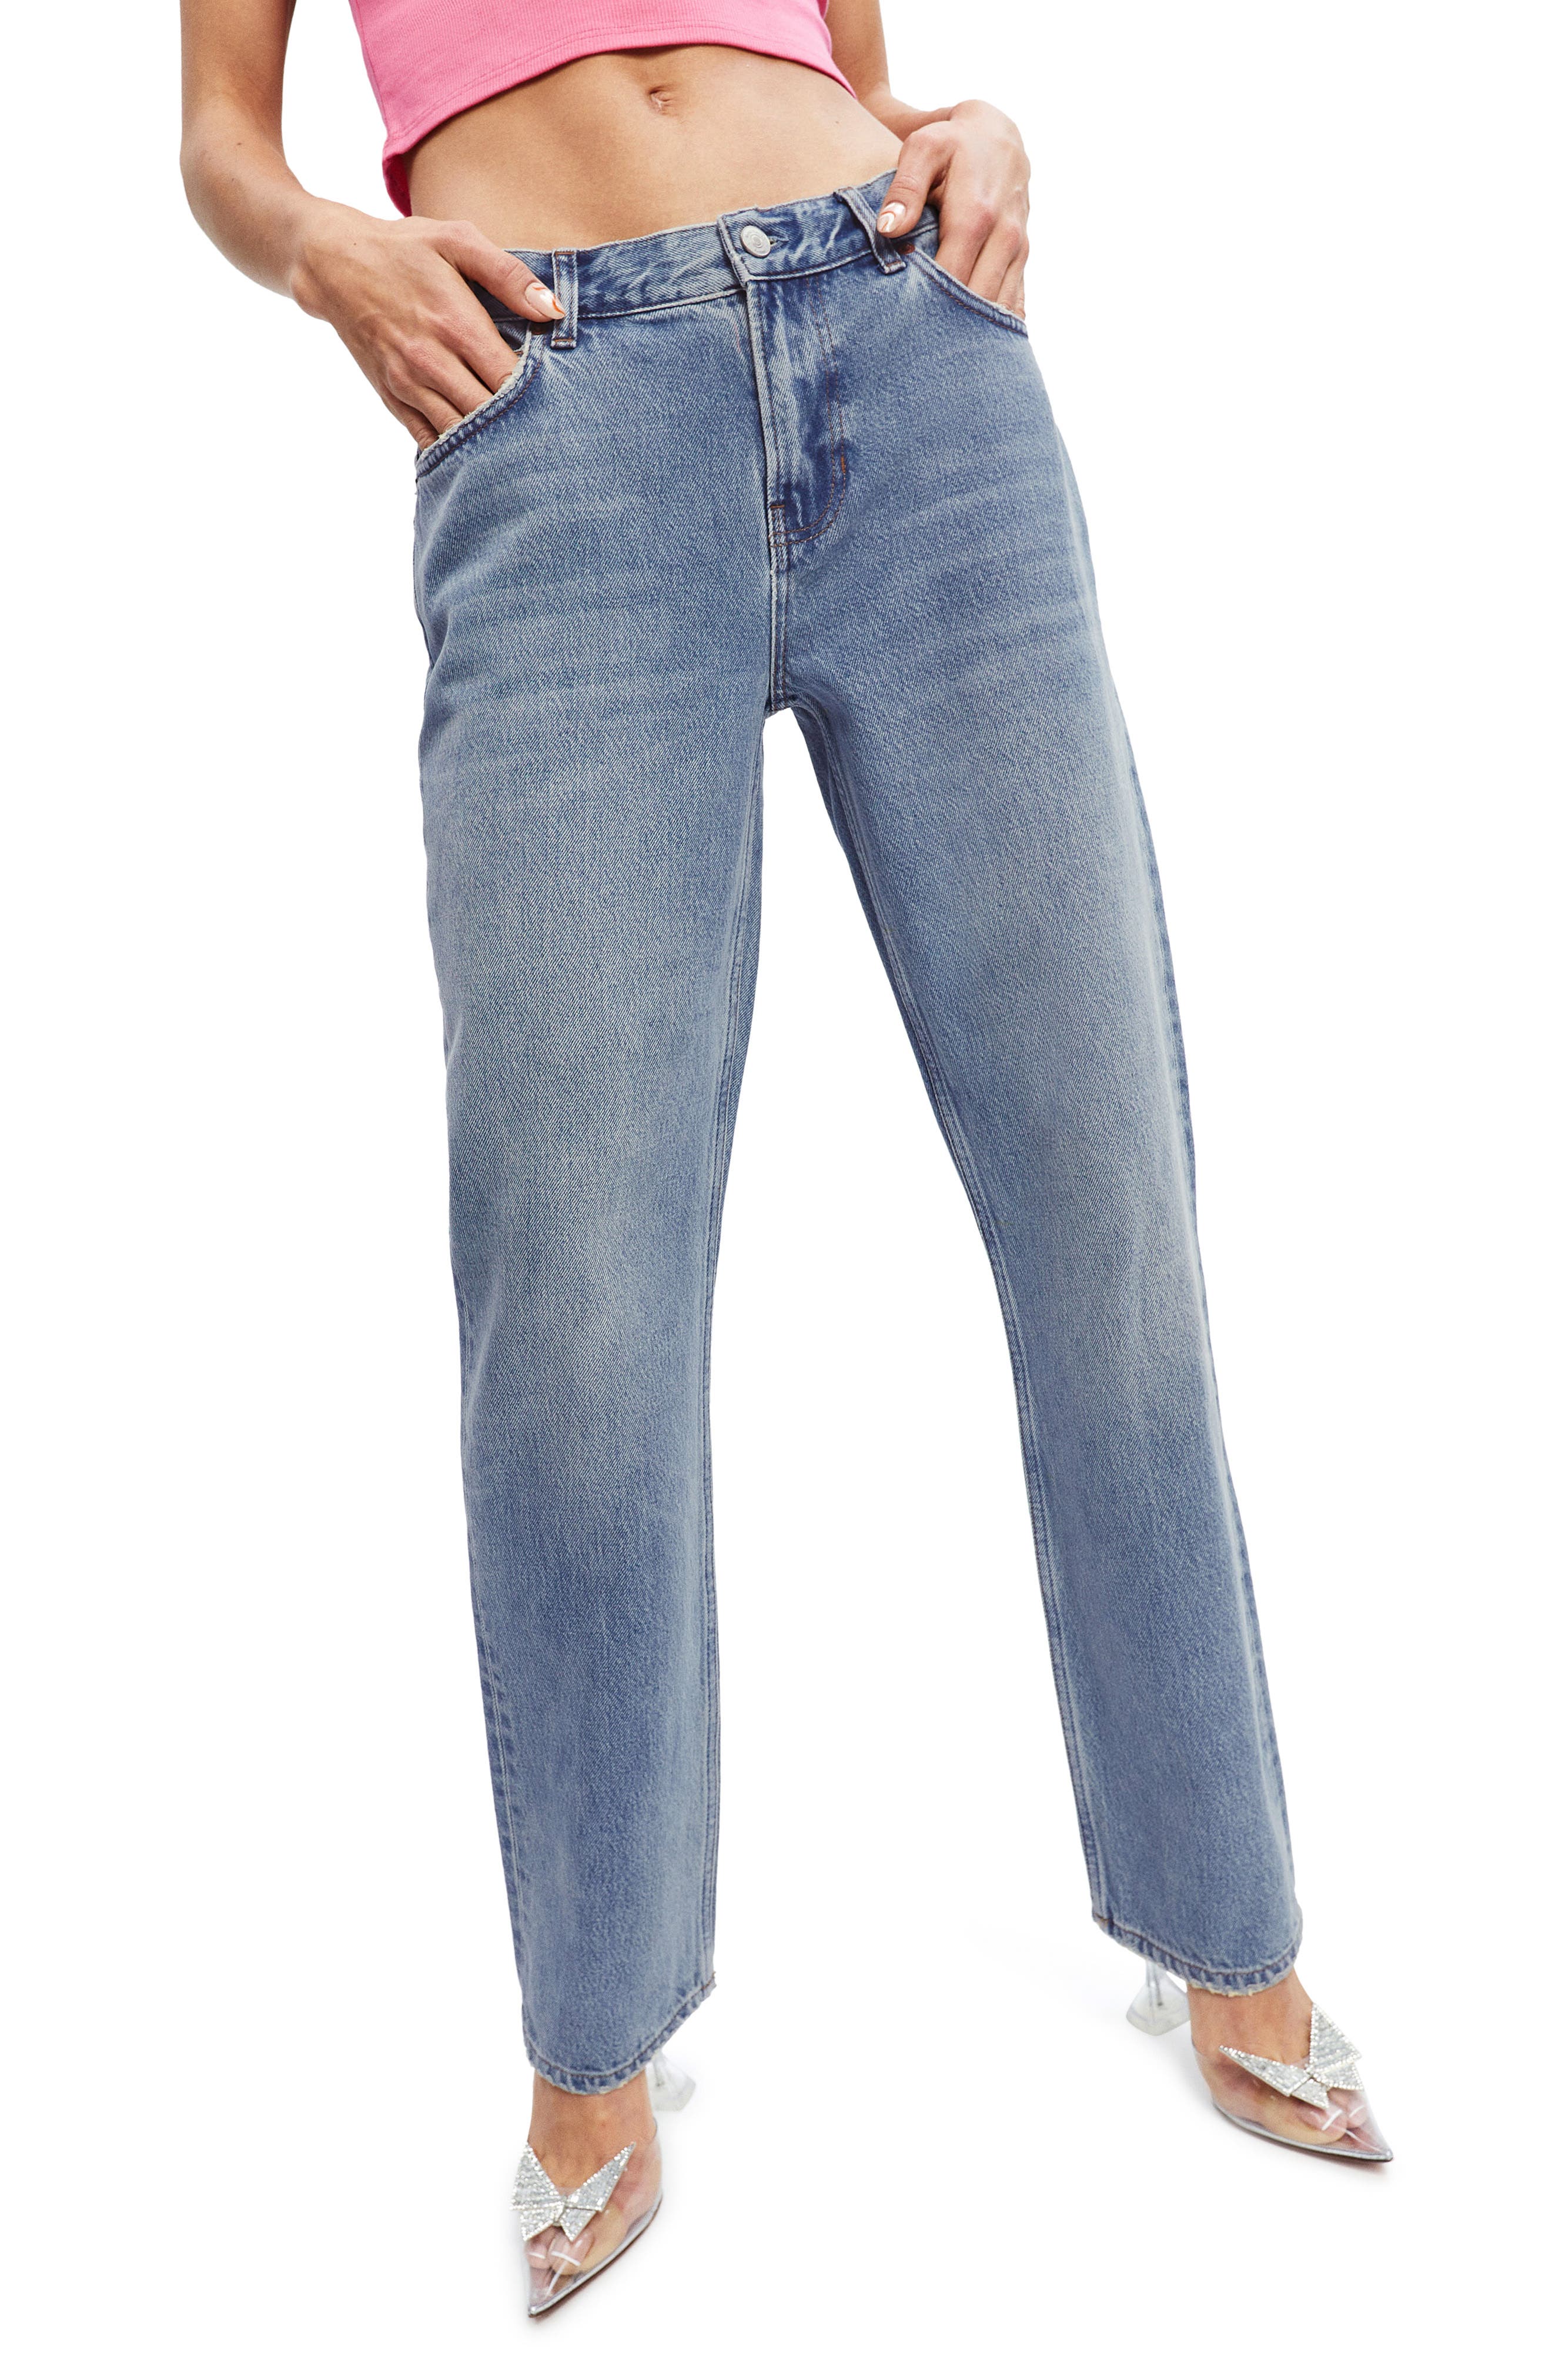 Reformation Addison Low Rise Relaxed Straight Leg Jeans in Sloane at Nordstrom, Size 24